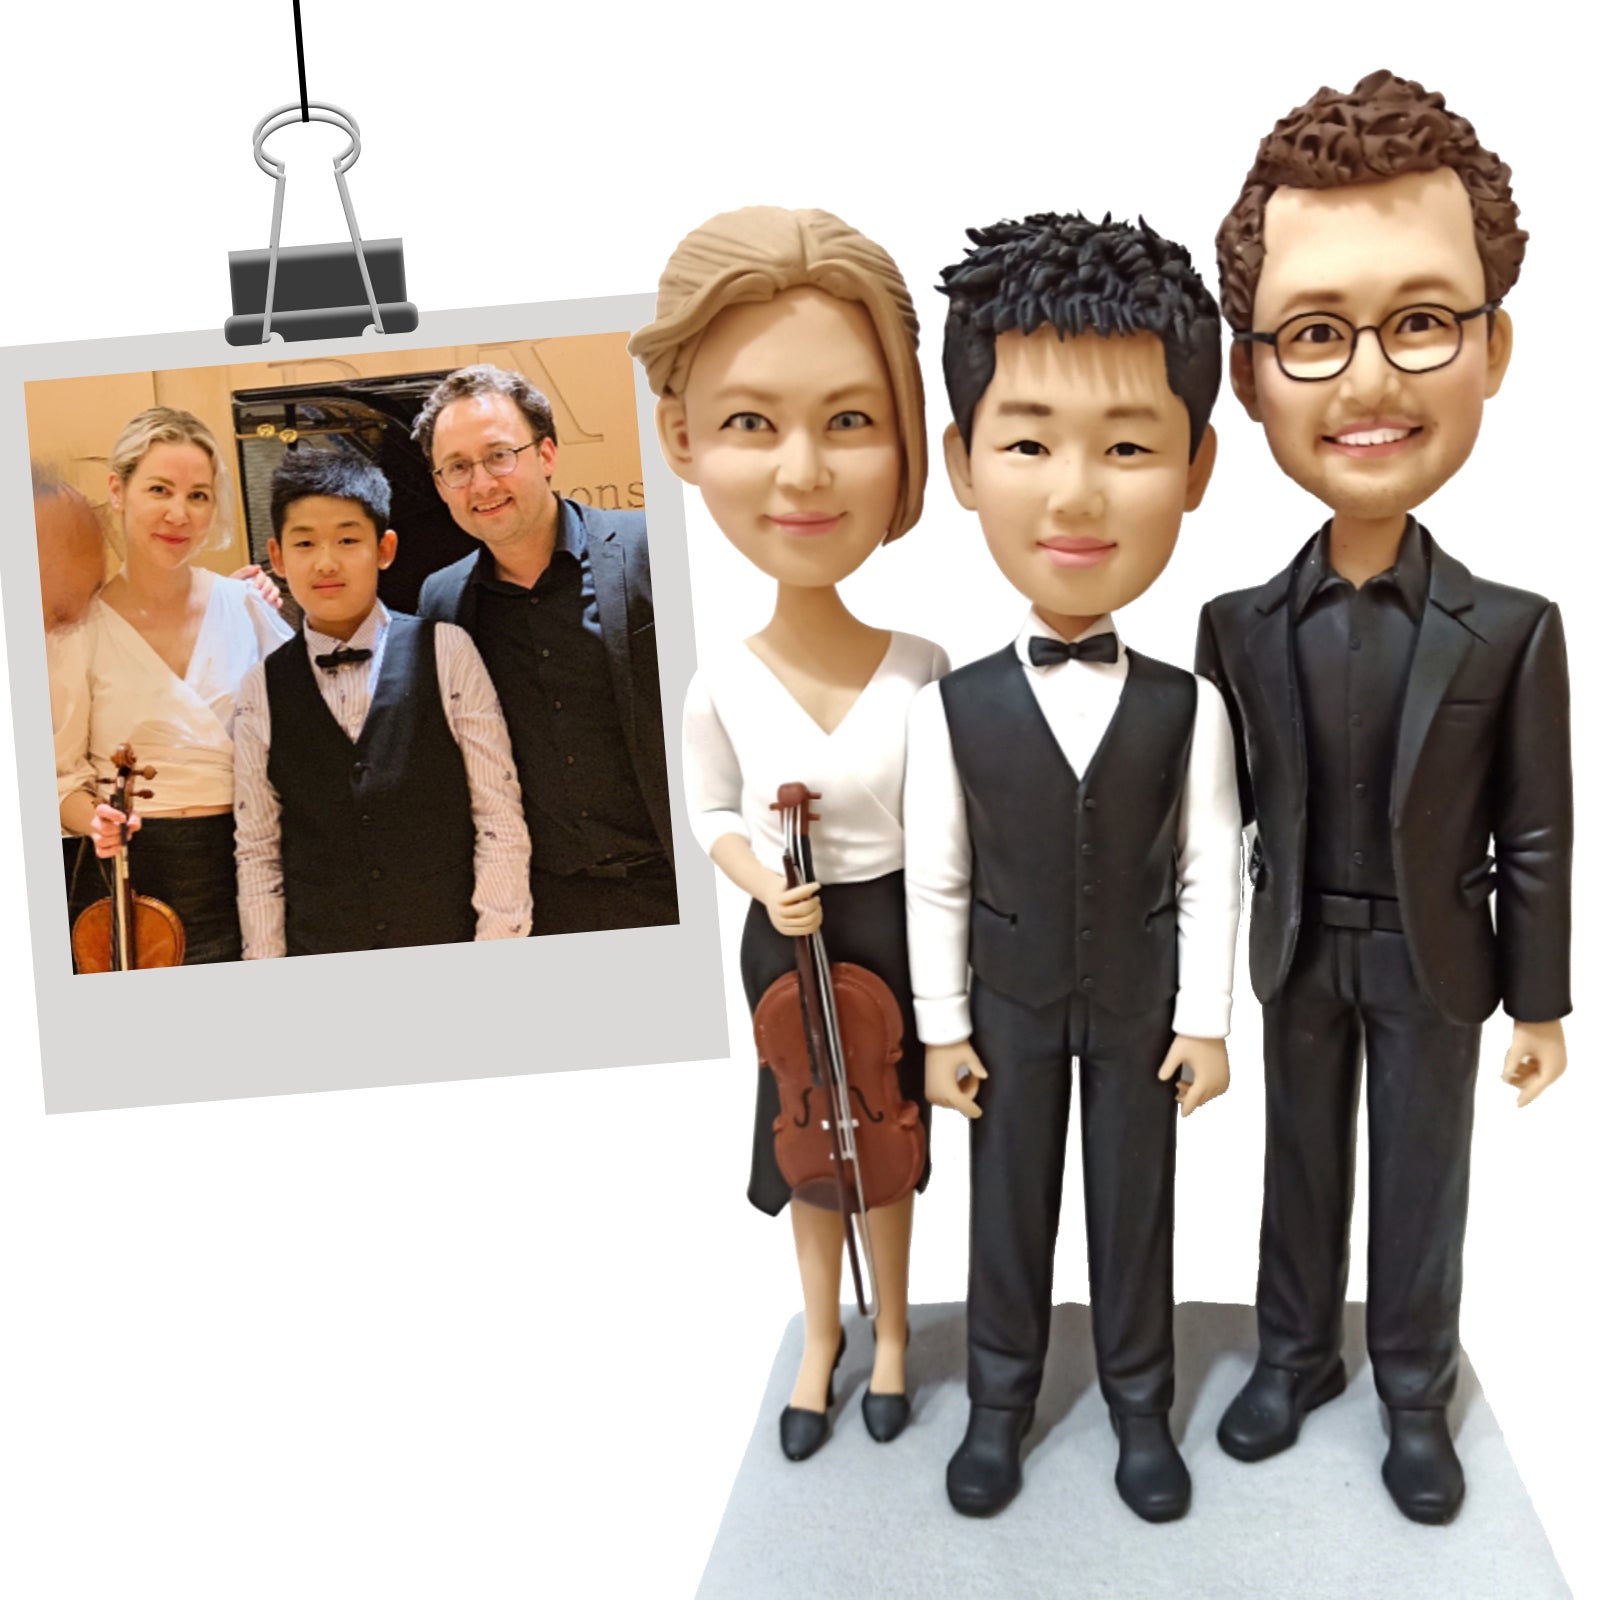 Personalized Set of Three Bobbleheads - Create Your Own Unique Family Keepsake!